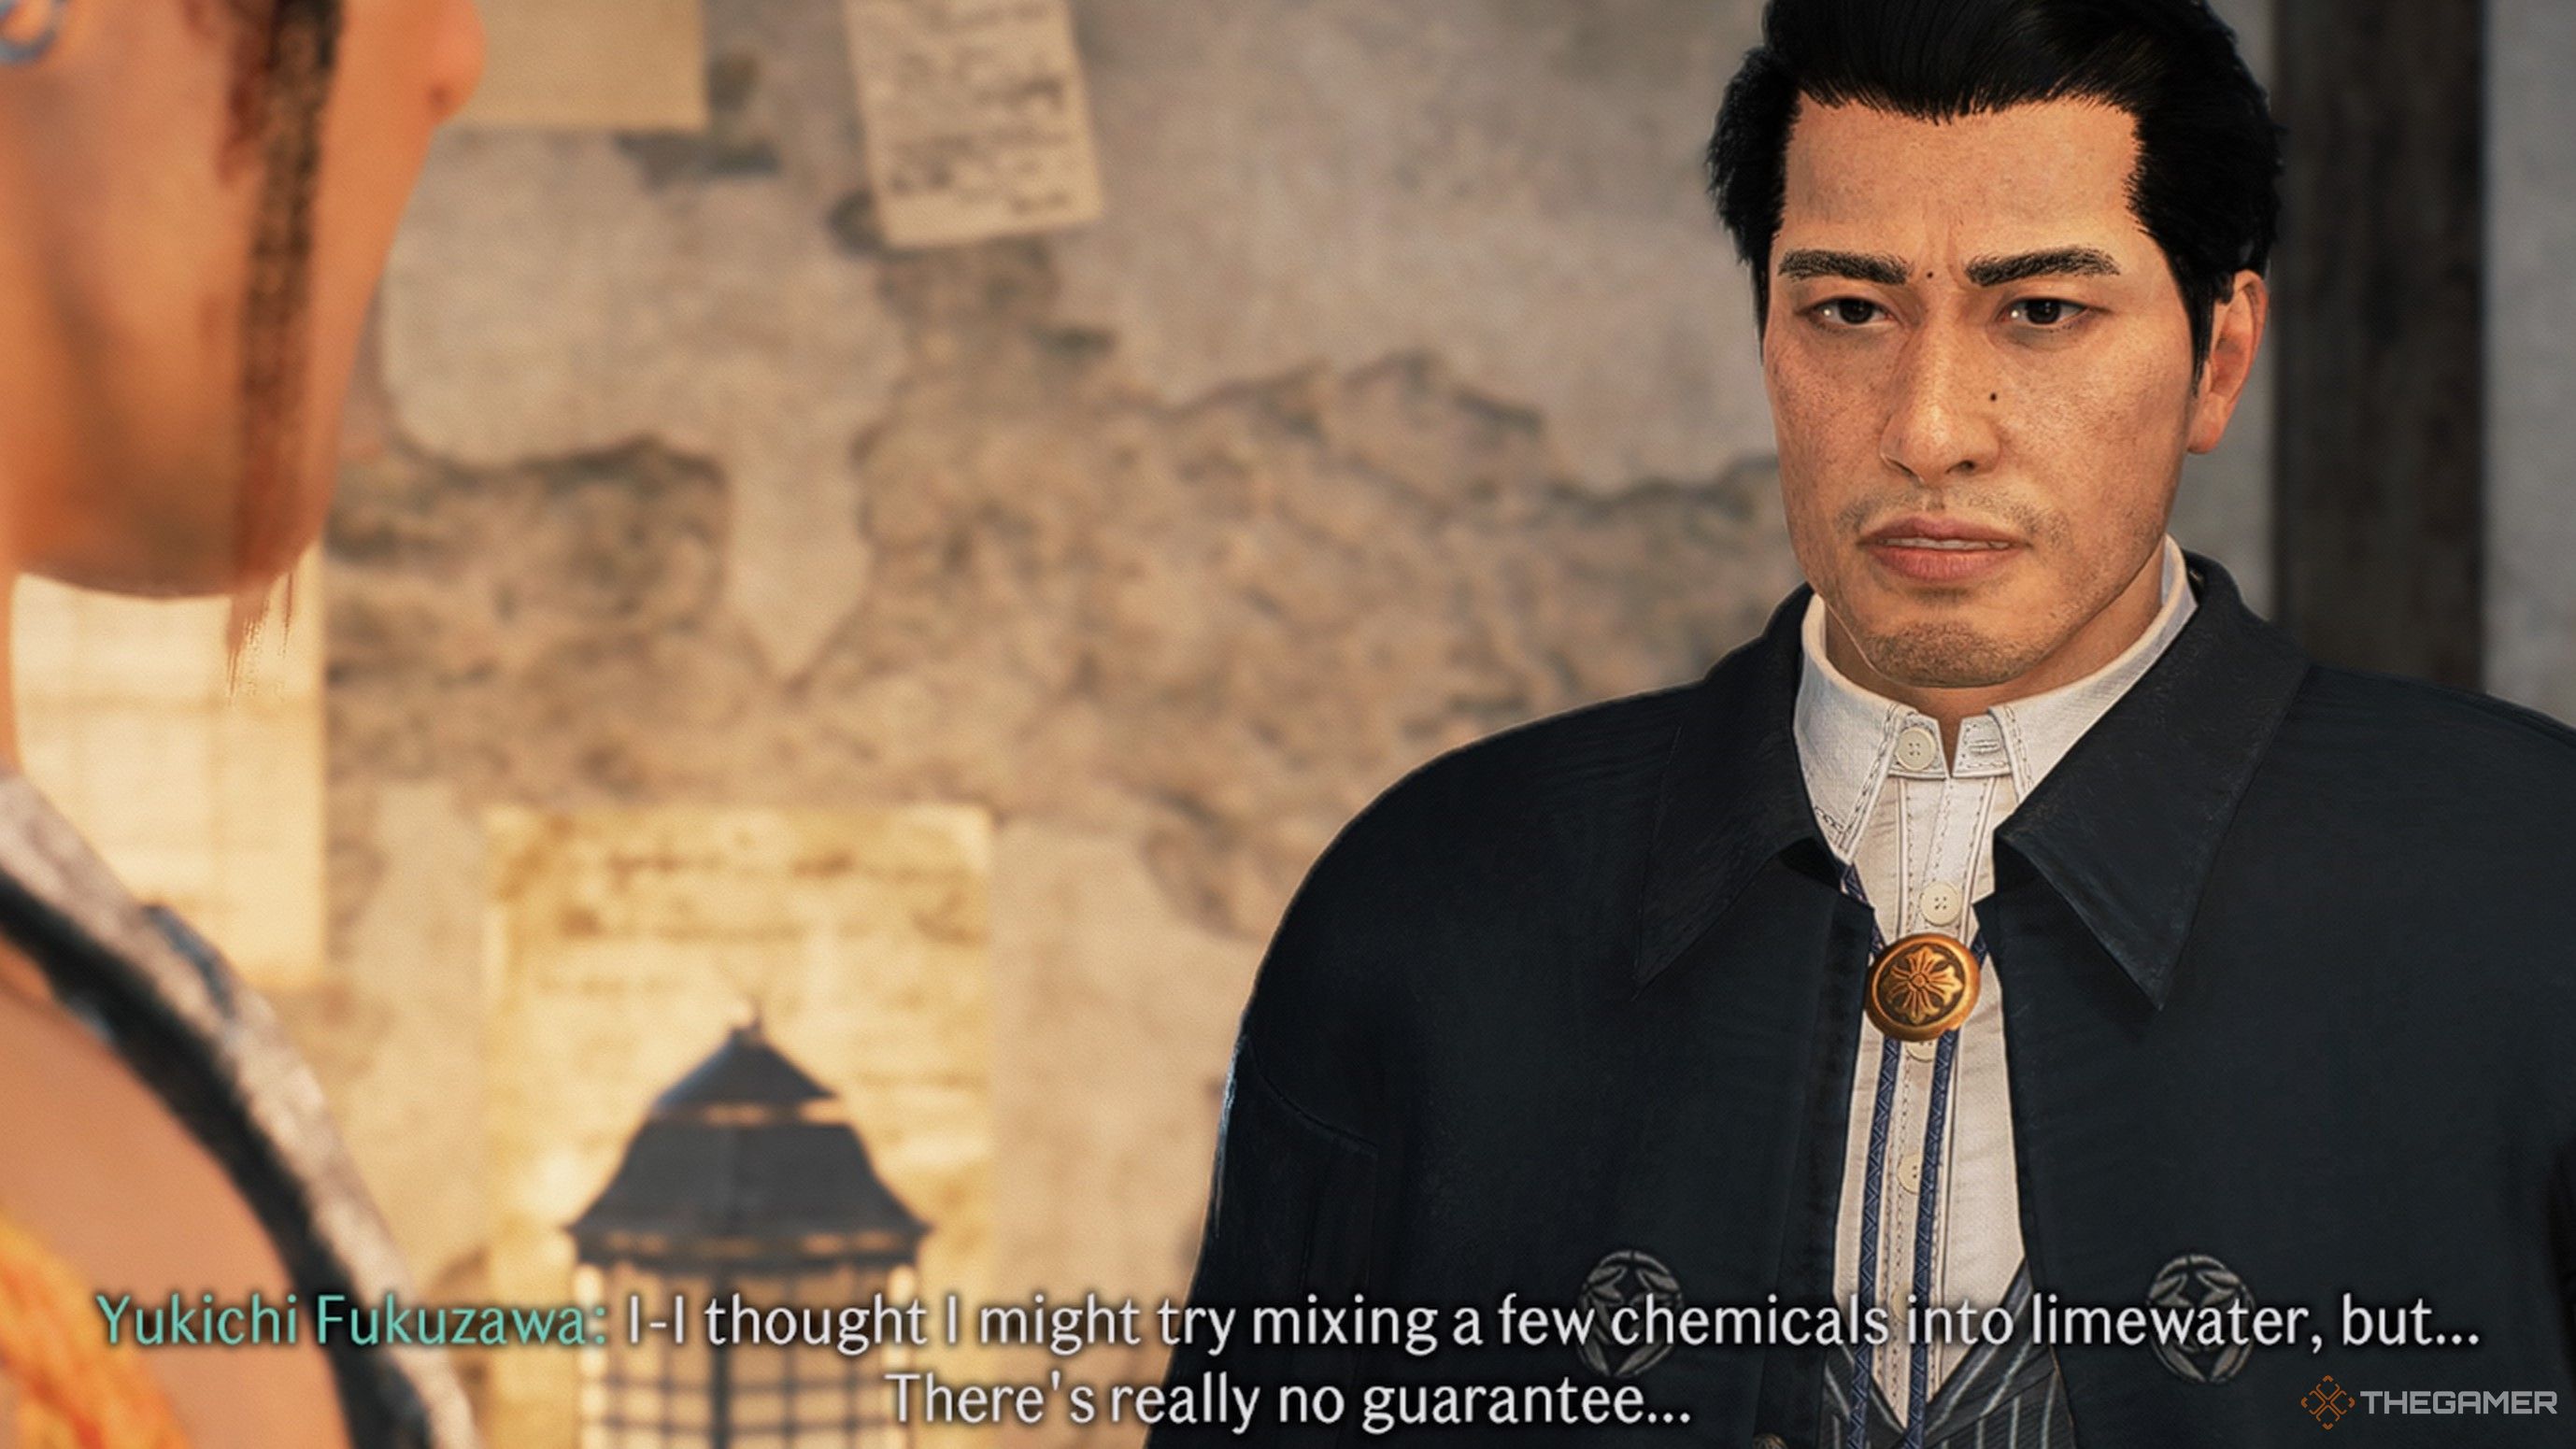 Yukichi brainstorms an antidote for blowfish toxins during a conversation inside Igashichi Iizuka's office in Rise Of The Ronin.